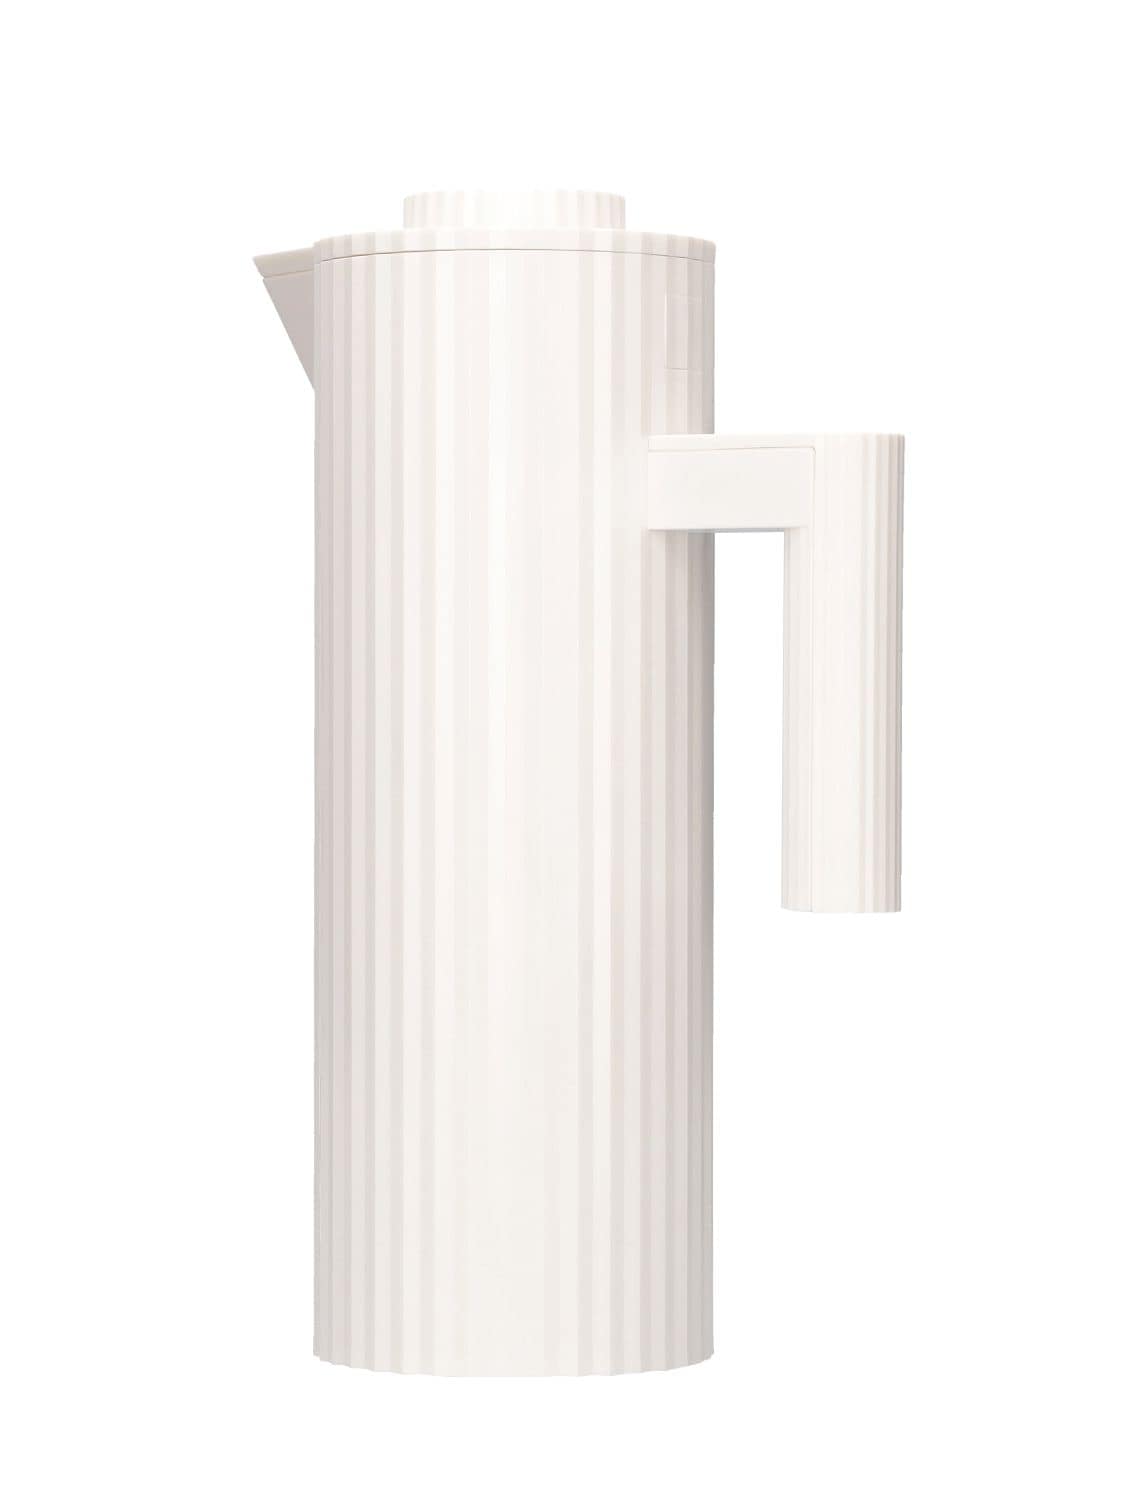 Shop Alessi Plissé Insulated Pitcher In White